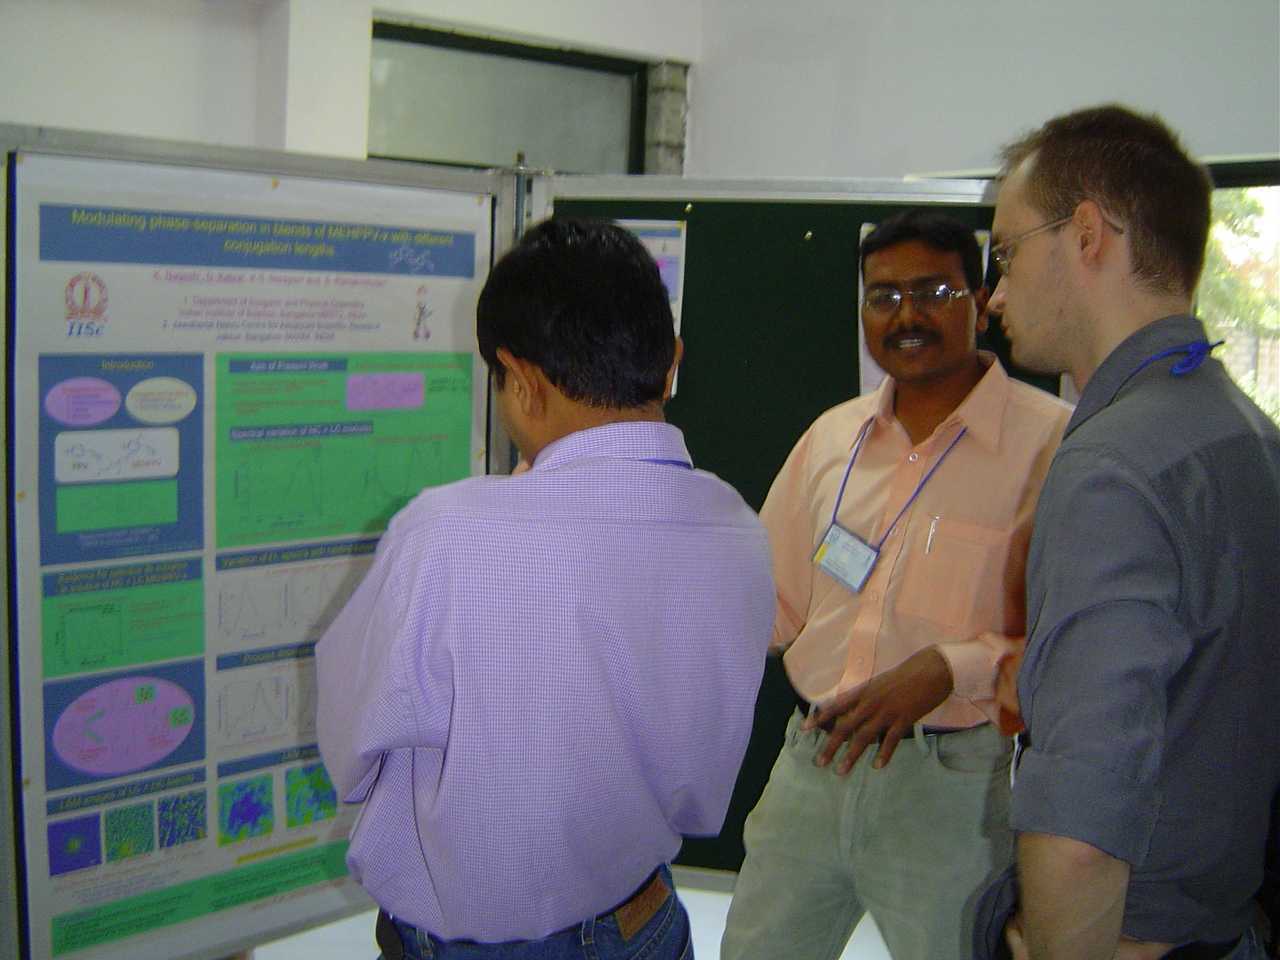 Nagesh with poster in OP2005